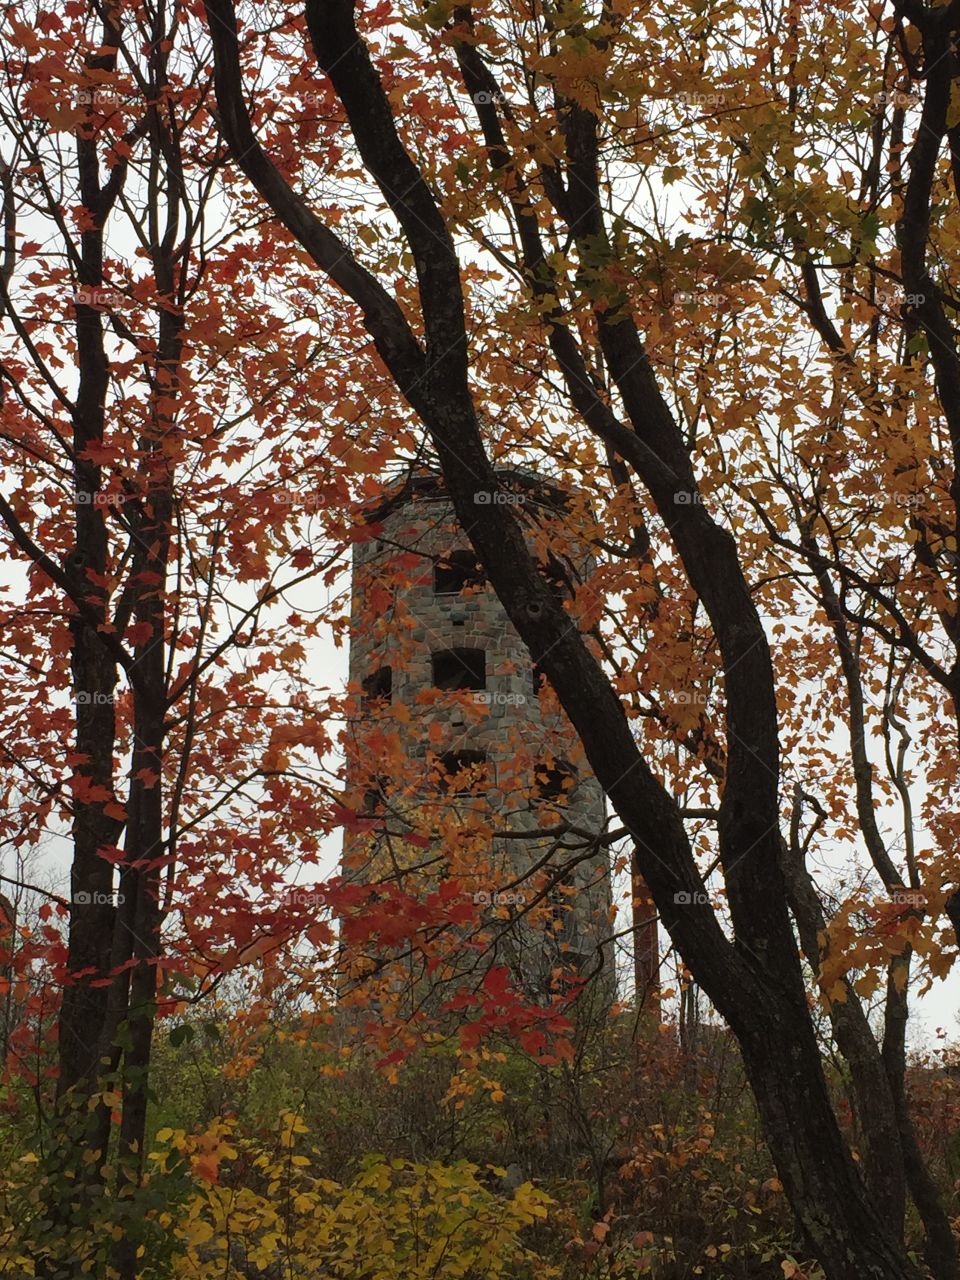 Enger Tower in Duluth Minnesota 